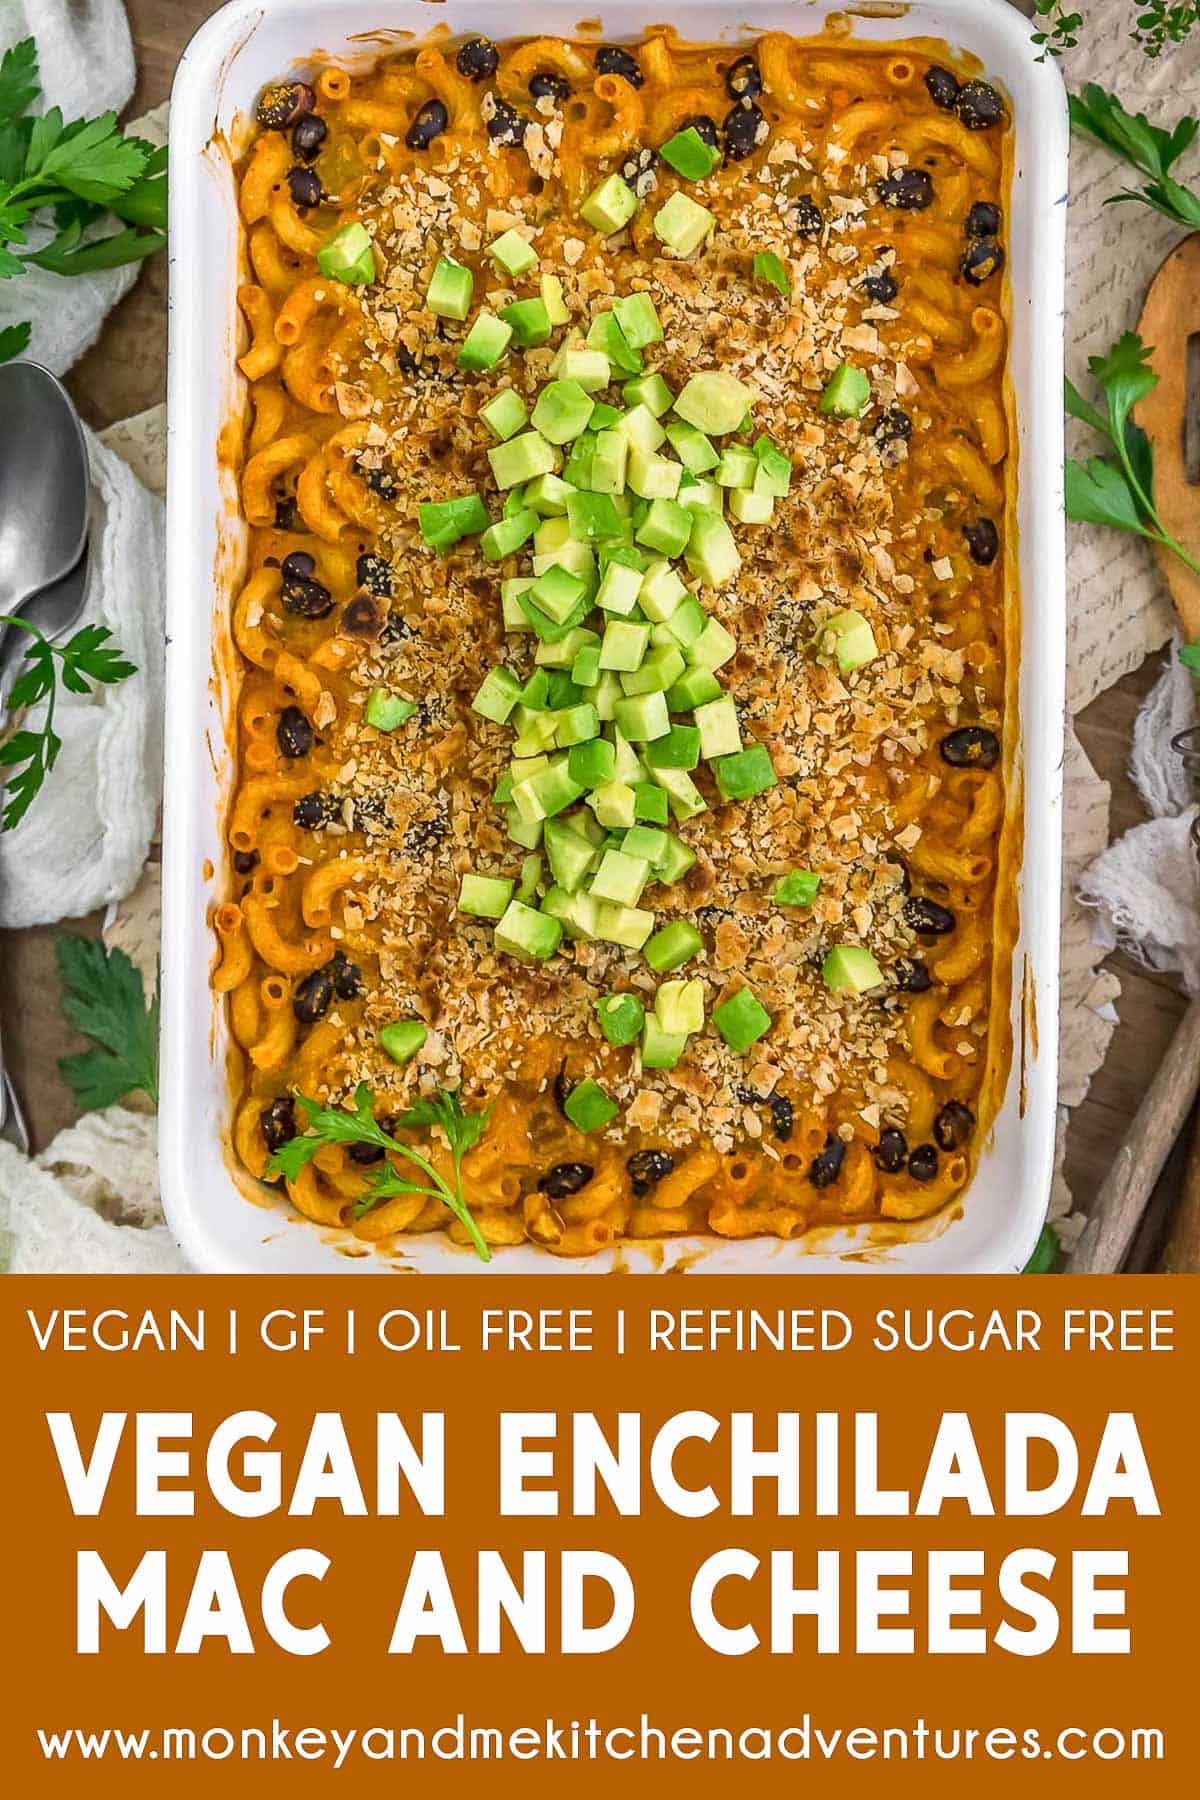 Vegan Enchilada Mac and Cheese with text description